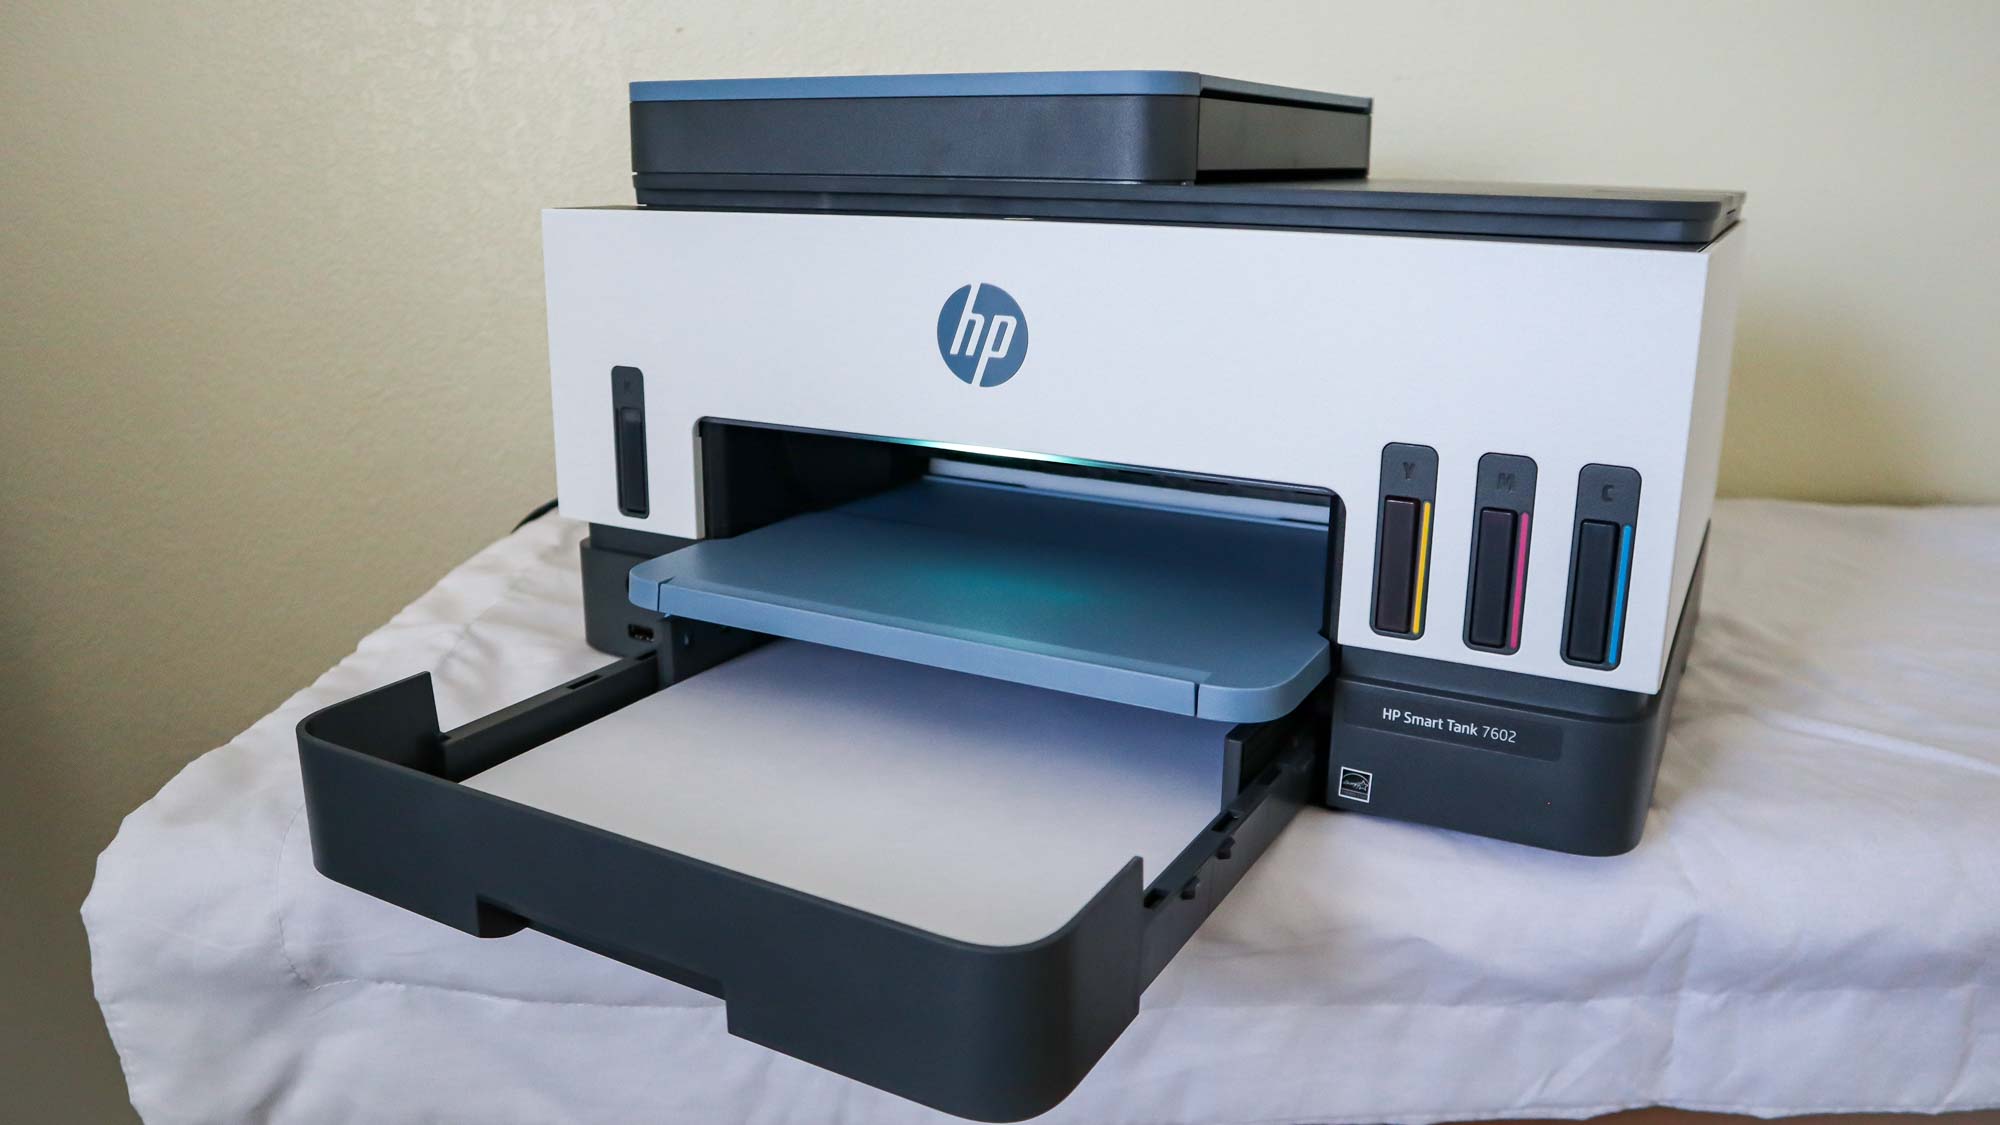 HP Smart Tank 7602 review unit on table